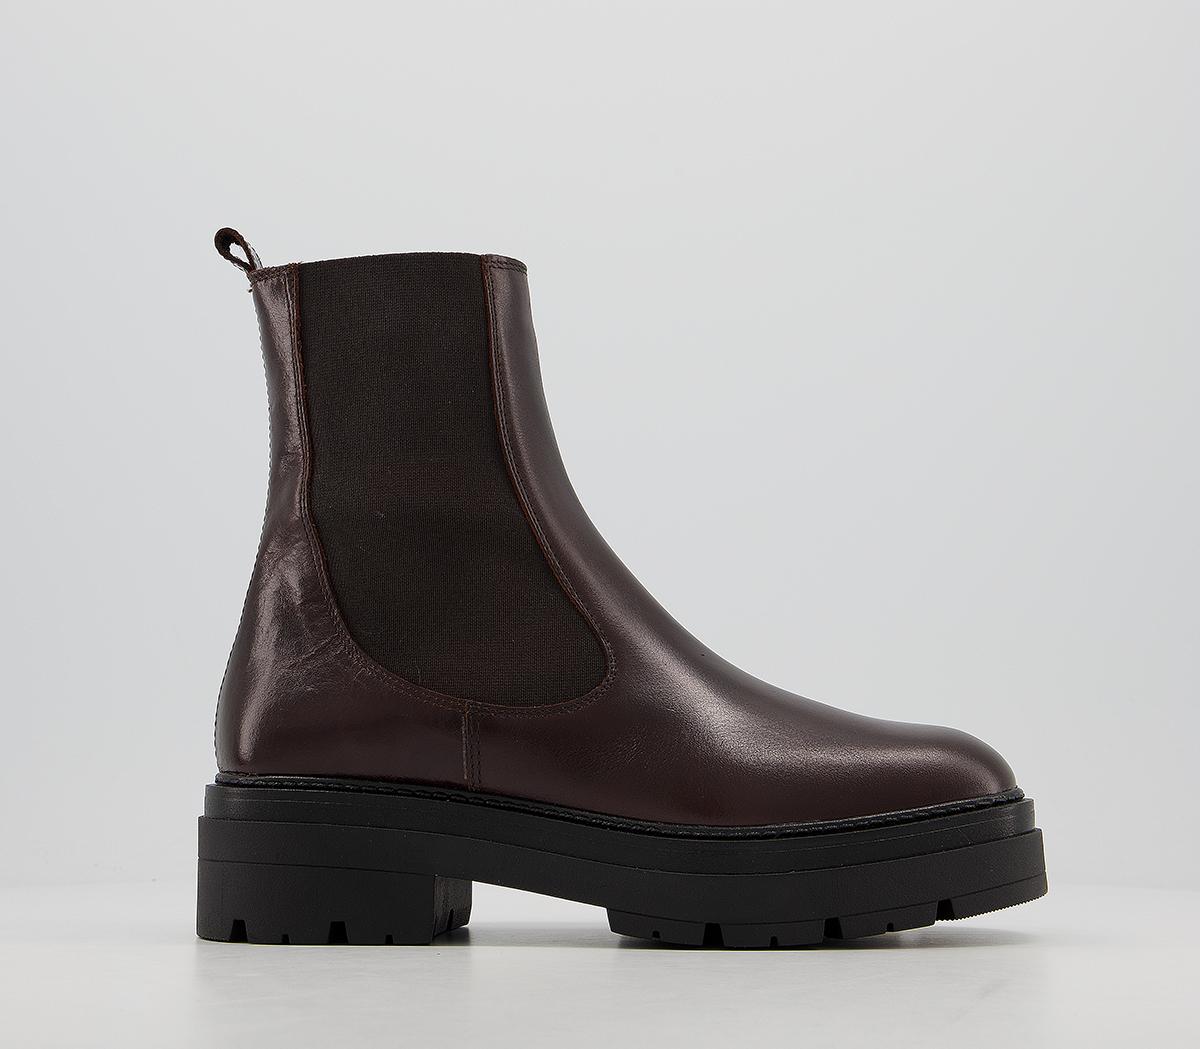 OFFICEAccuse Chunky Chelsea BootsBrown Leather